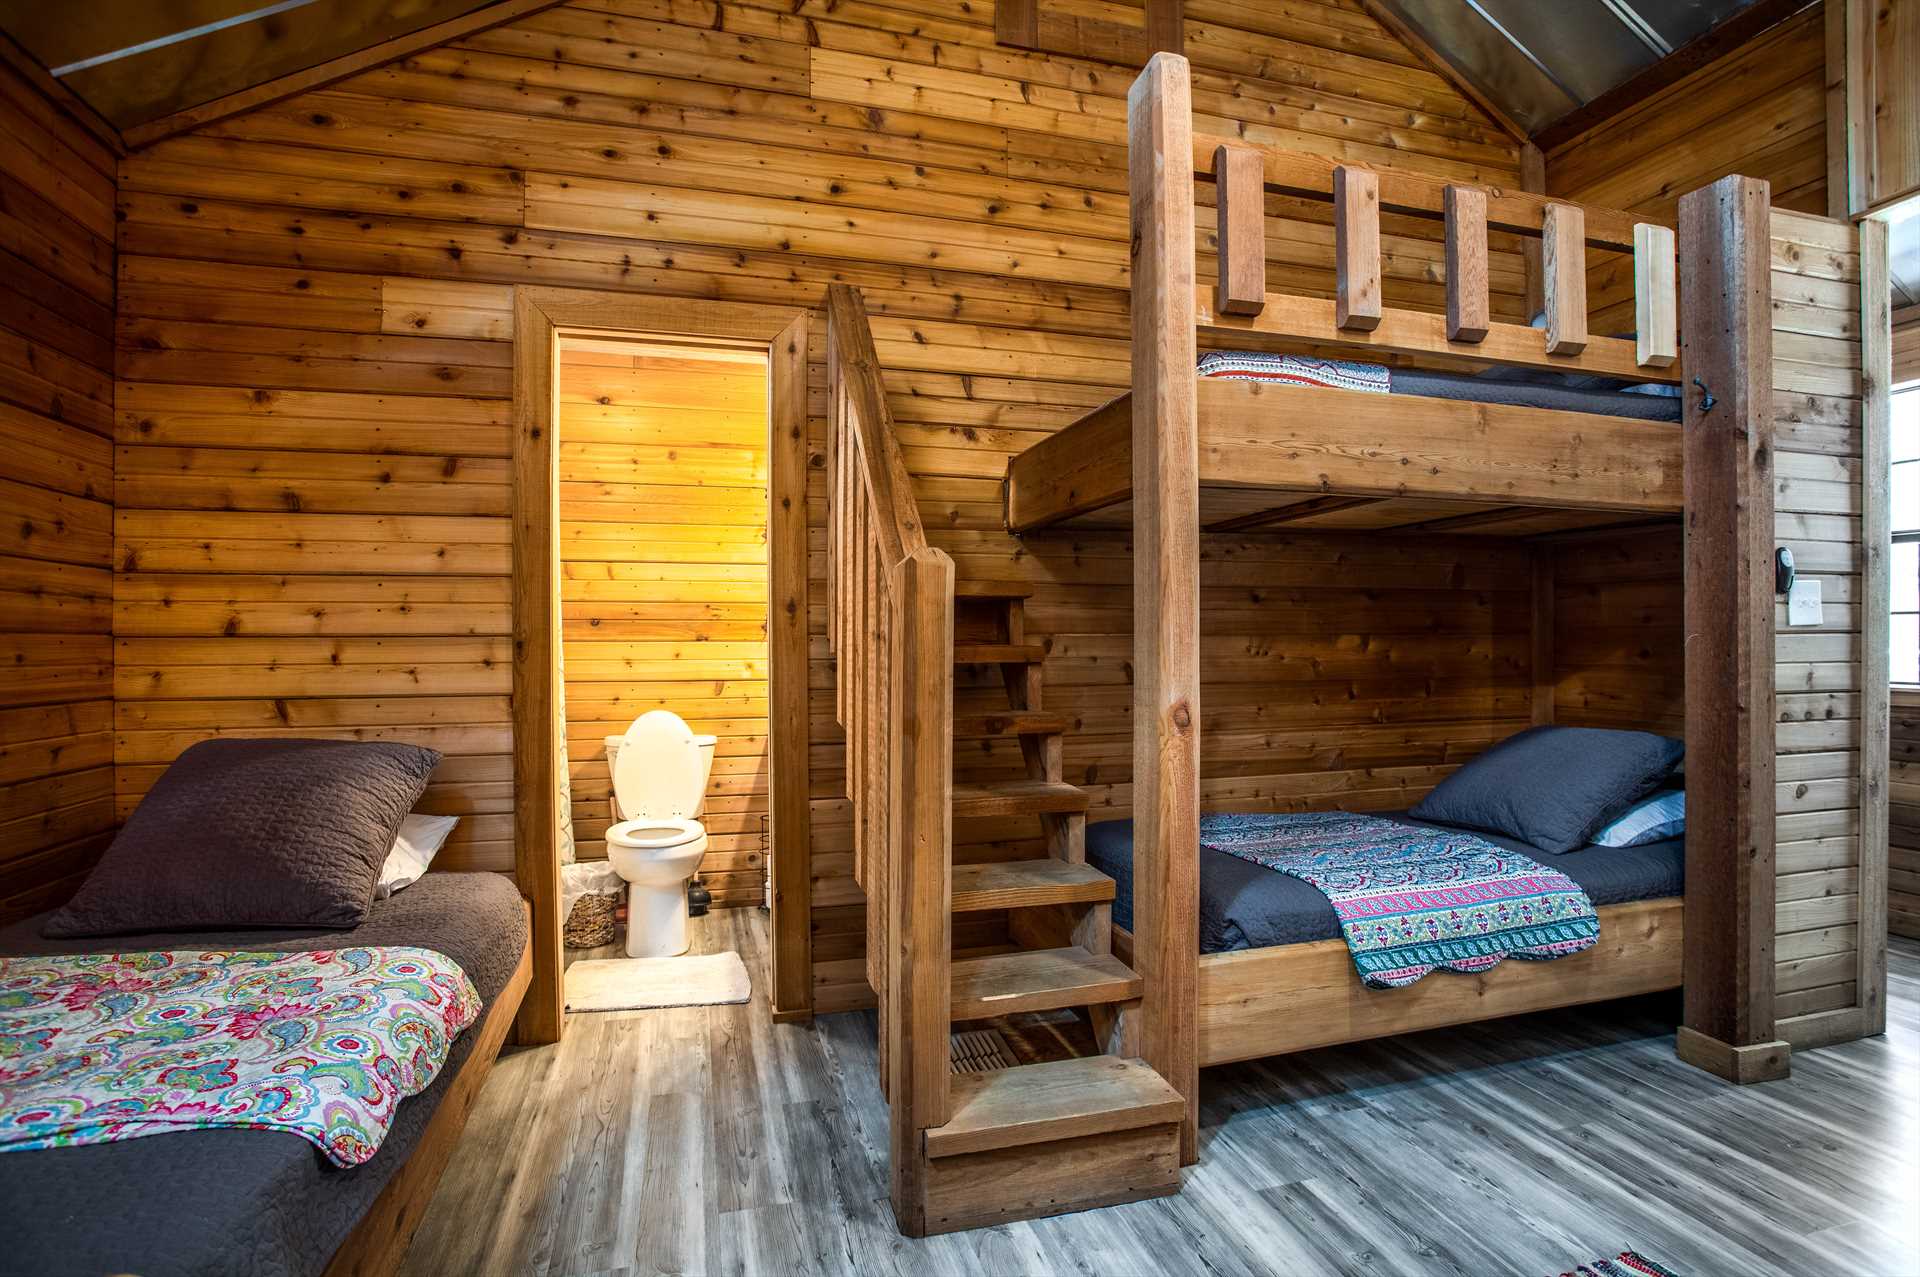                                                 The bunkhouse bedroom comes with its own dedicated full bath, which is also supplied with fresh linens.